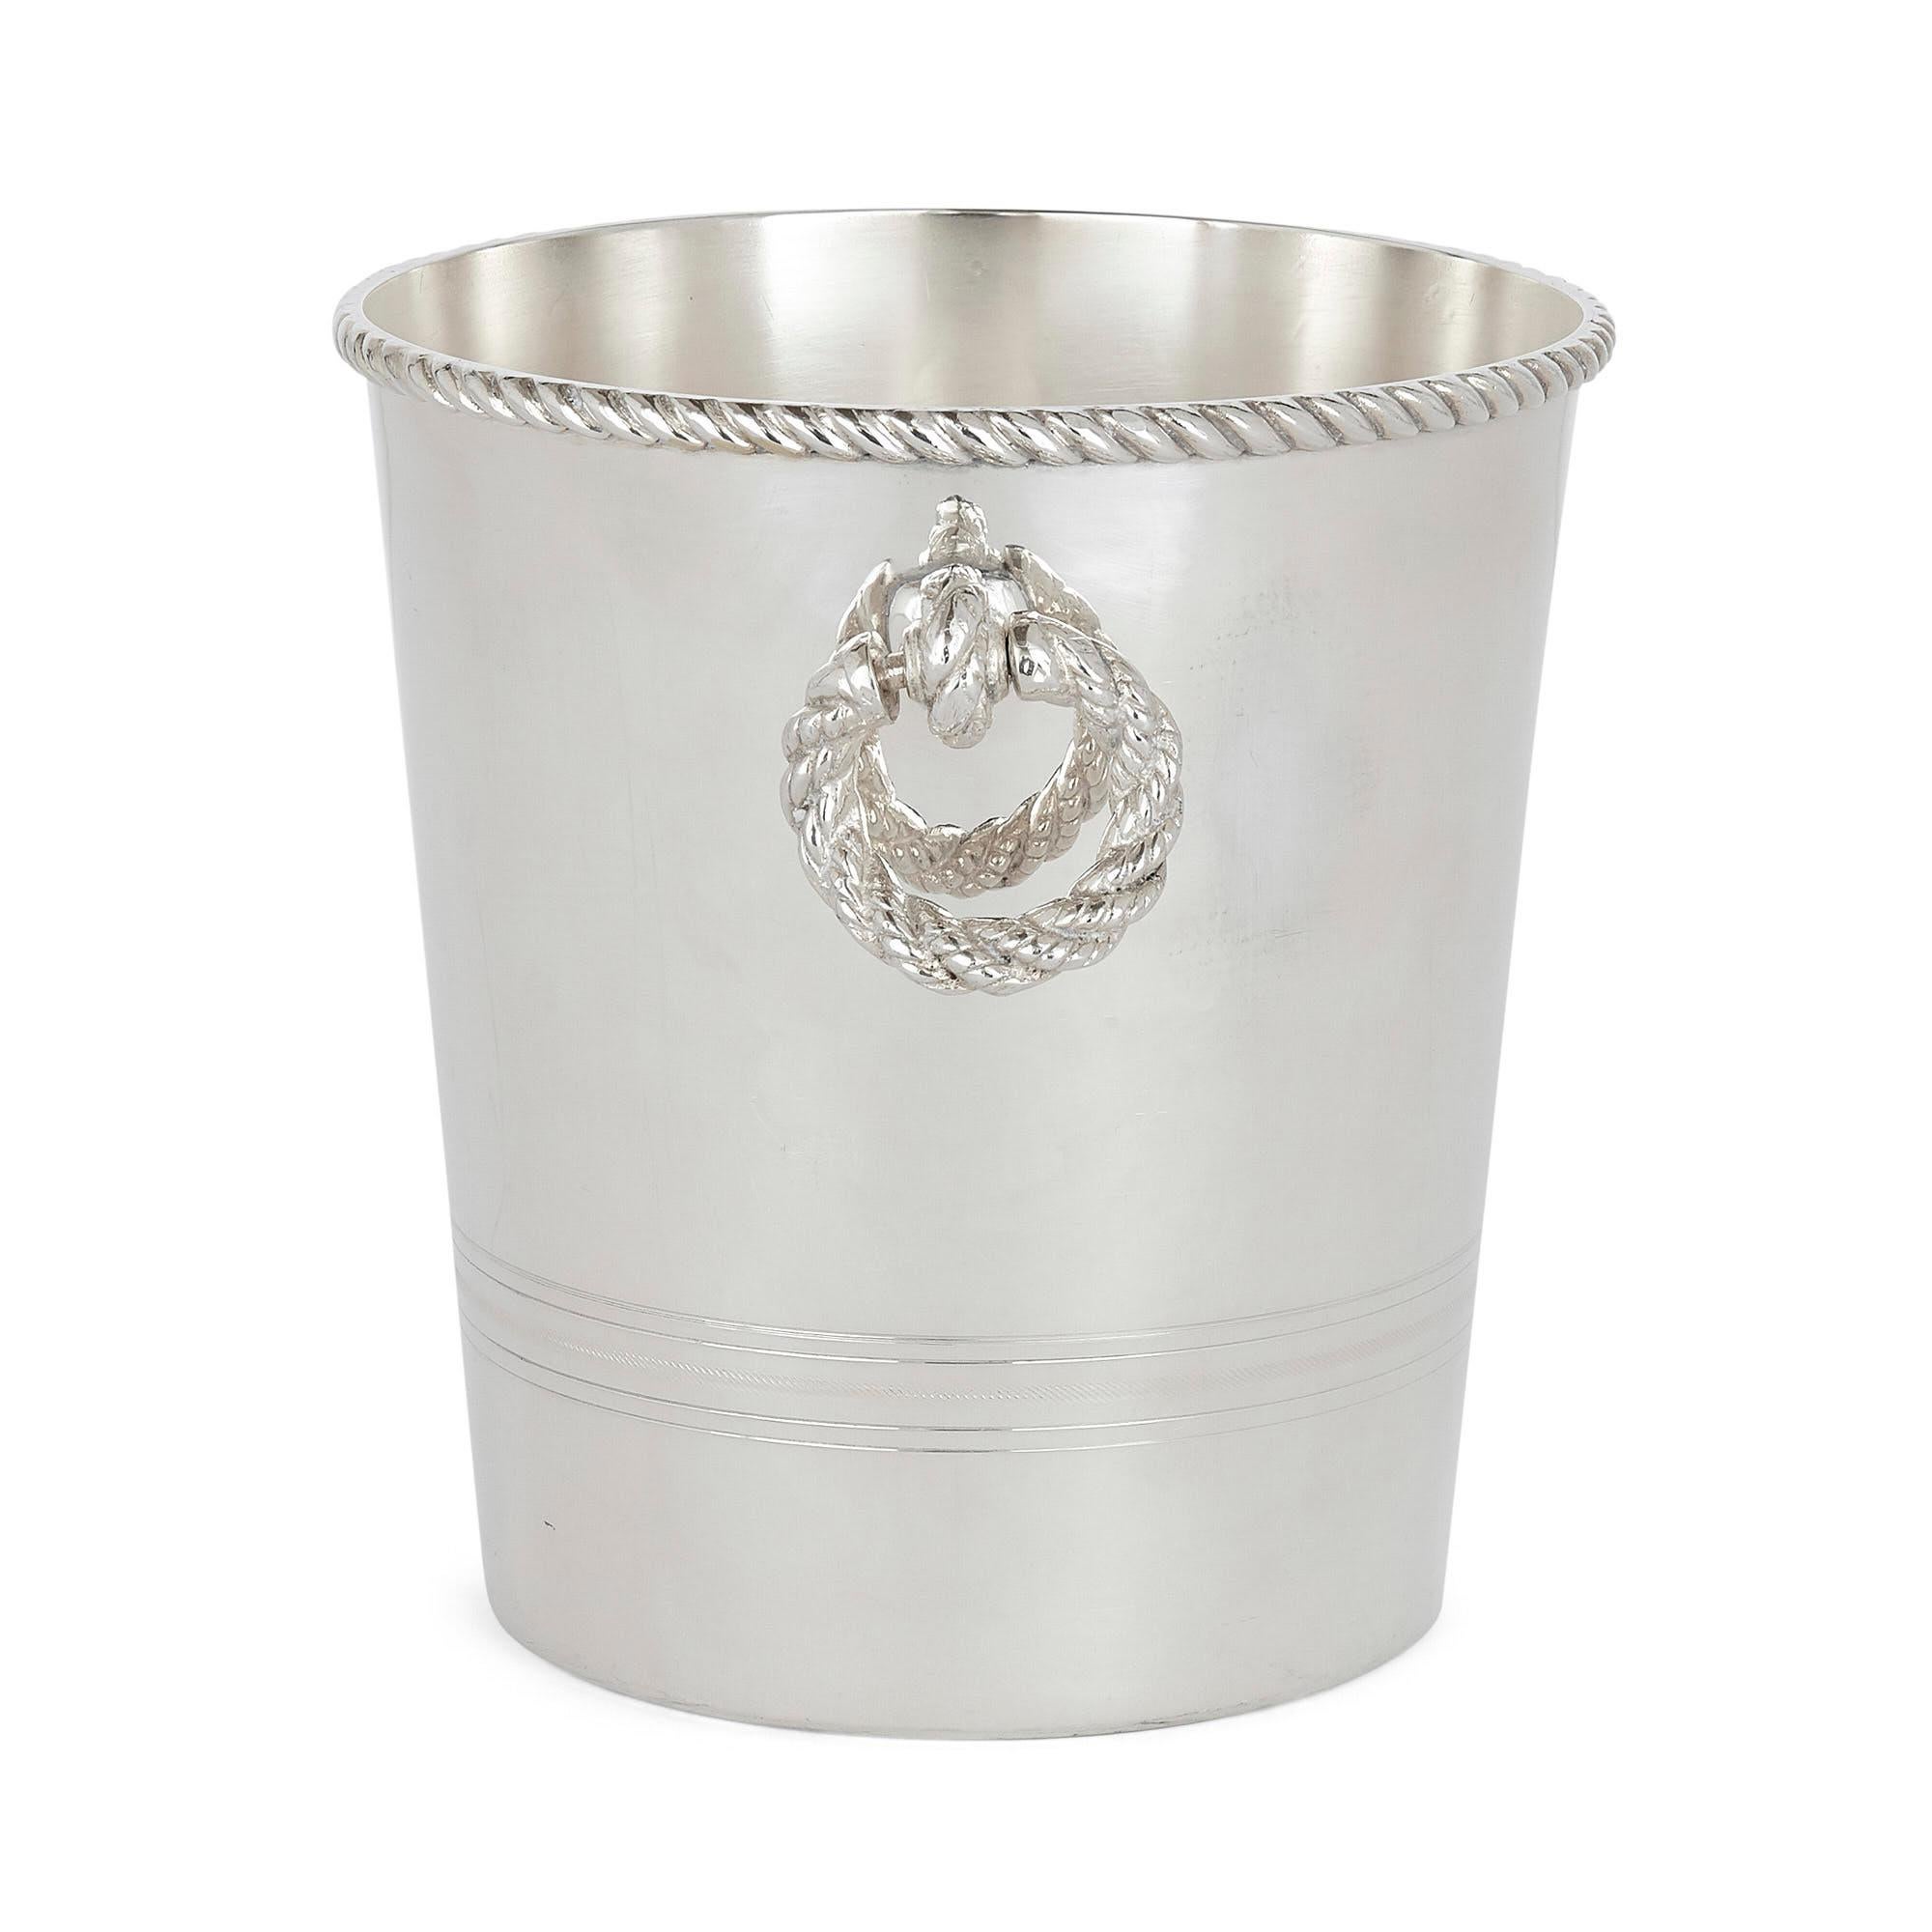 Fine silver-plate ice bucket by Lebanese Firm Habis
Lebanese, 20th century
Dimensions: Height 21cm, diameter 20cm

Featuring an elegant tapered cylindrical body, this fine ice bucket is crafted from silver-plate by Lebanese firm Habis. The